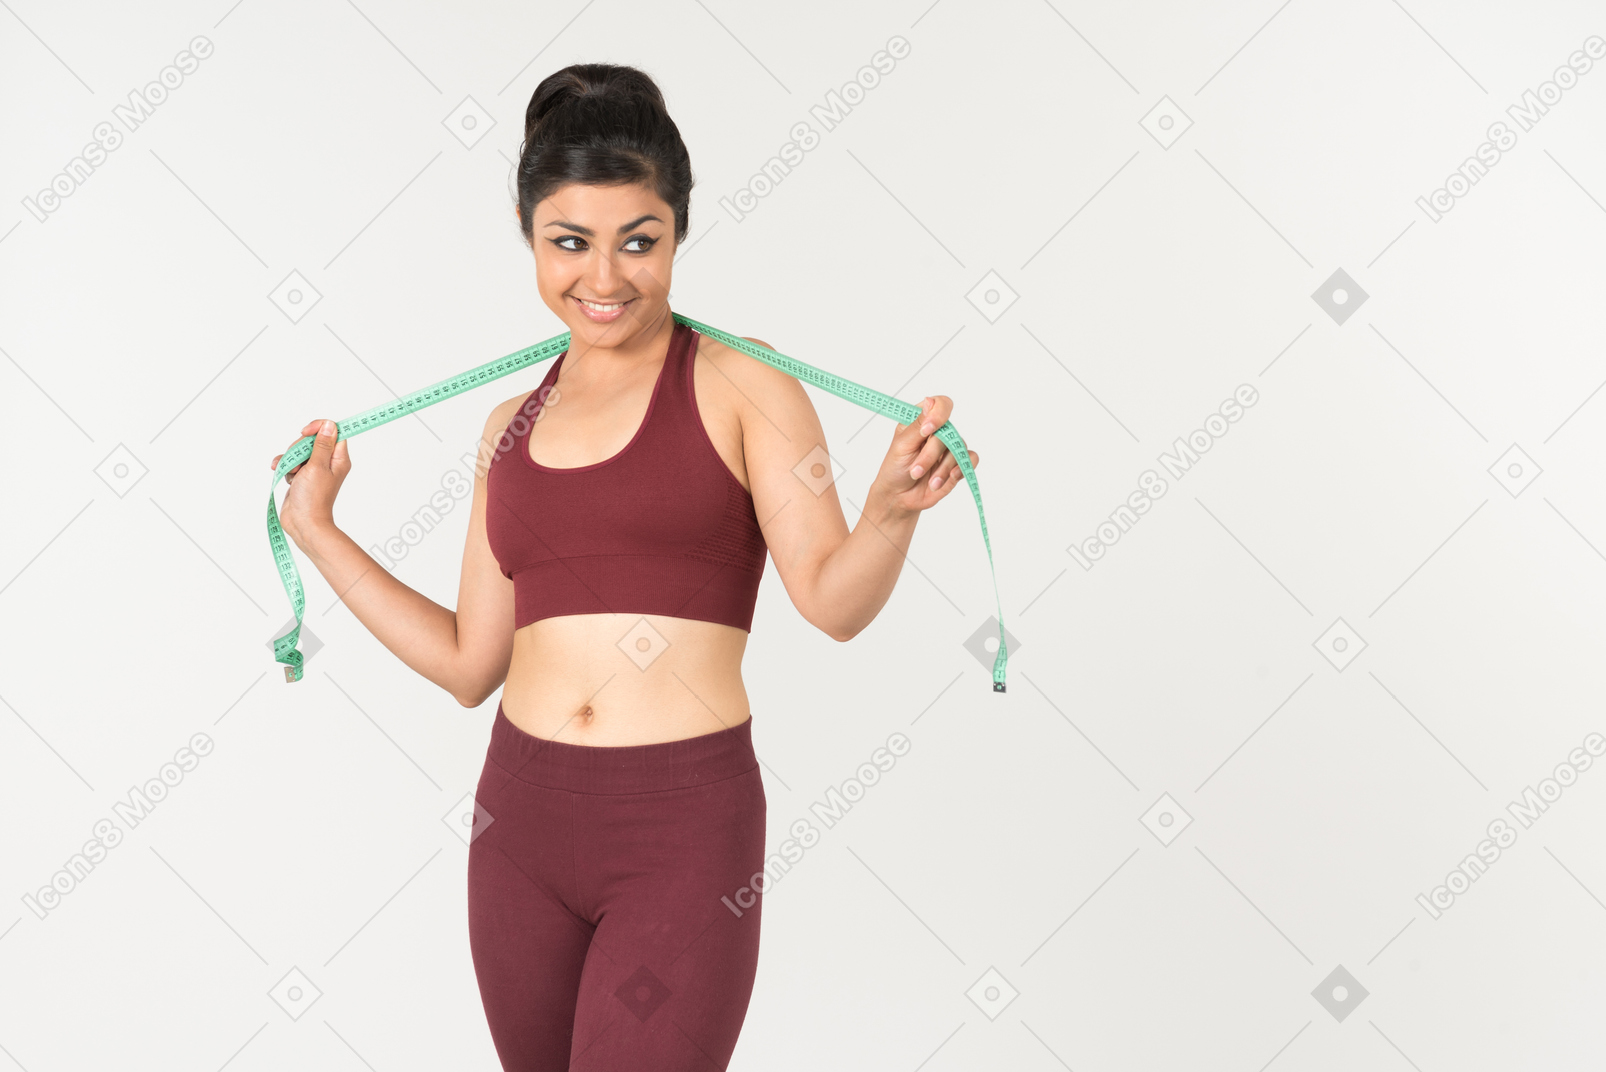 Young indian woman in sporstwear standing with cloth ruler on her neck